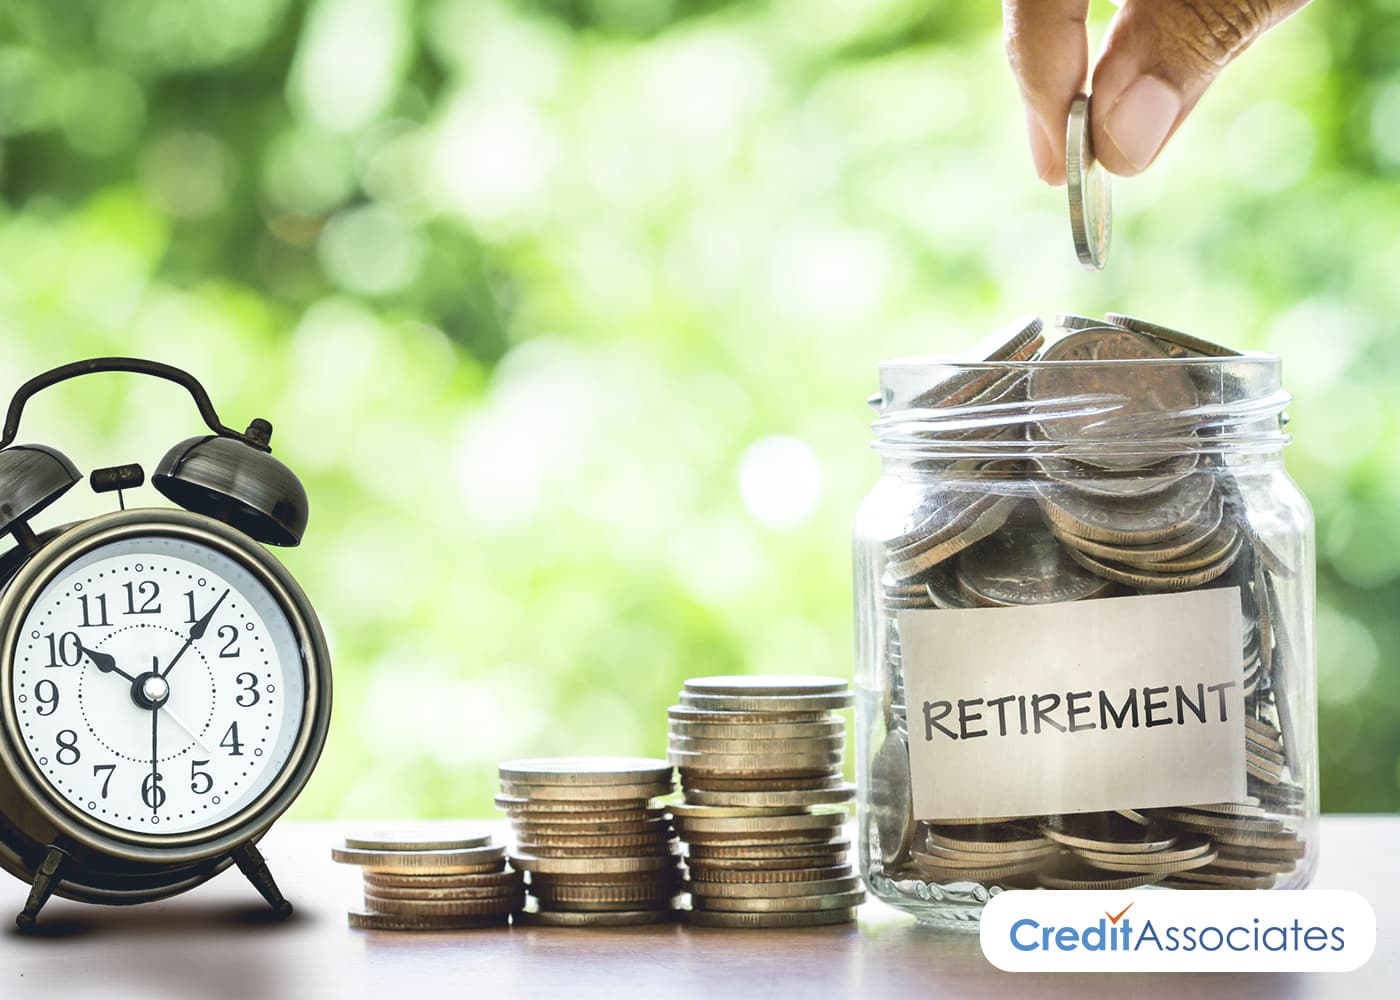 Should I Use My Retirement Savings to Pay Off Debt?